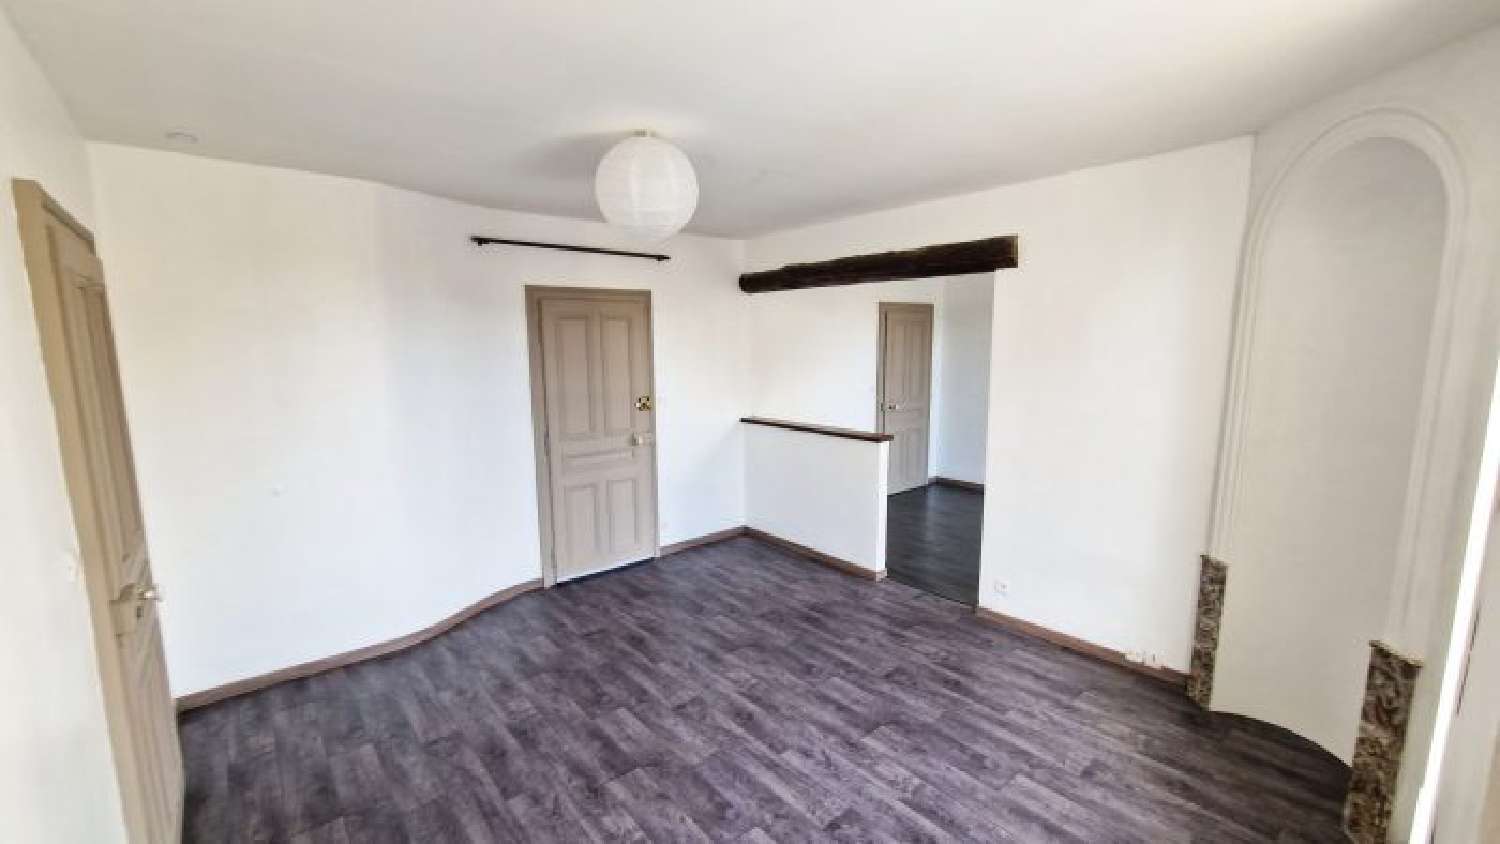  kaufen Wohnung/ Apartment Pagny-sur-Moselle Meurthe-et-Moselle 7